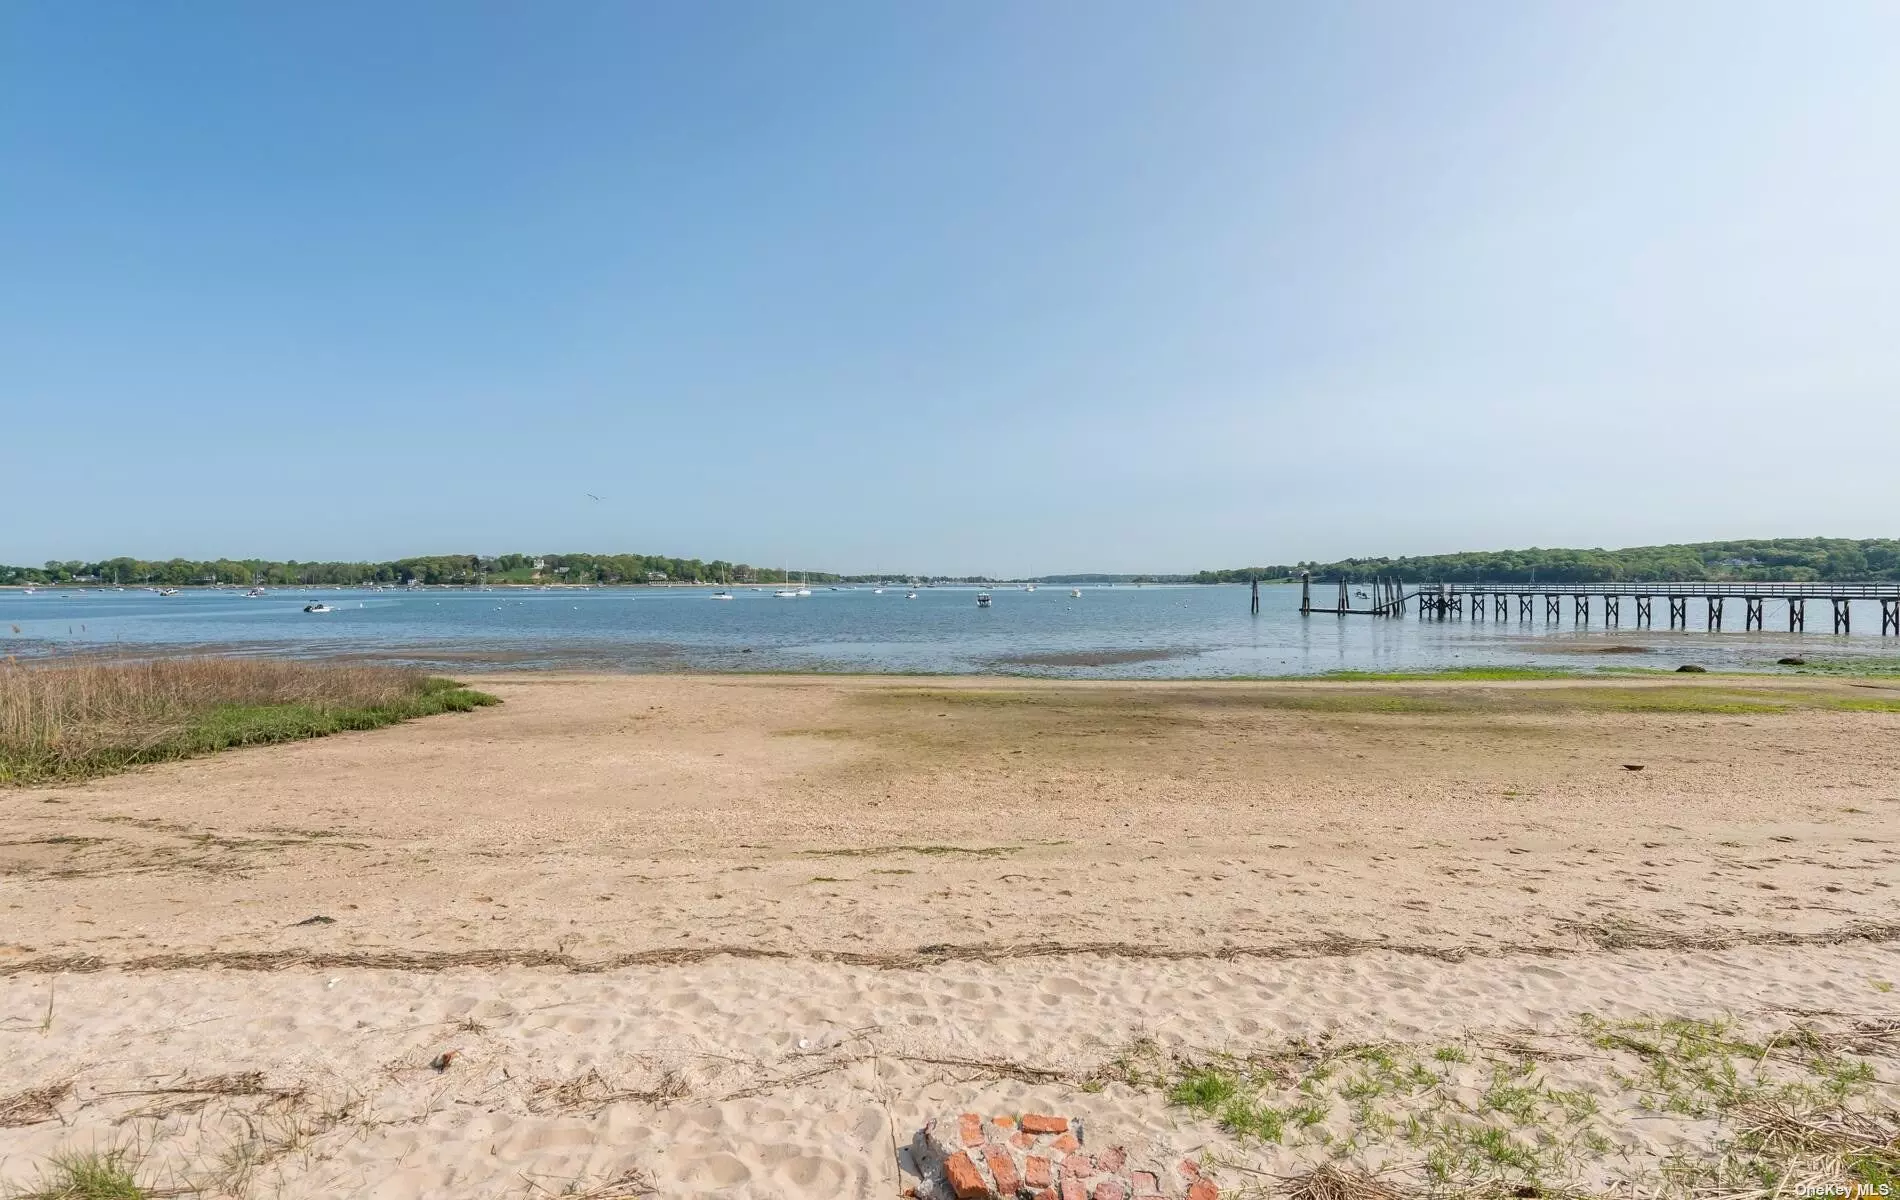 Don&rsquo;t miss this once in a lifetime opportunity to own beachfront property on lovely Oyster Bay Harbor. This unique waterside lot is located in an R1-10 residential district. It is ideal for pursuing water sports and outdoor activities. Perfect for watercraft storage, boat launching, and sunbathing, this plot is not zoned for home construction, but offers a host of other possibilities.